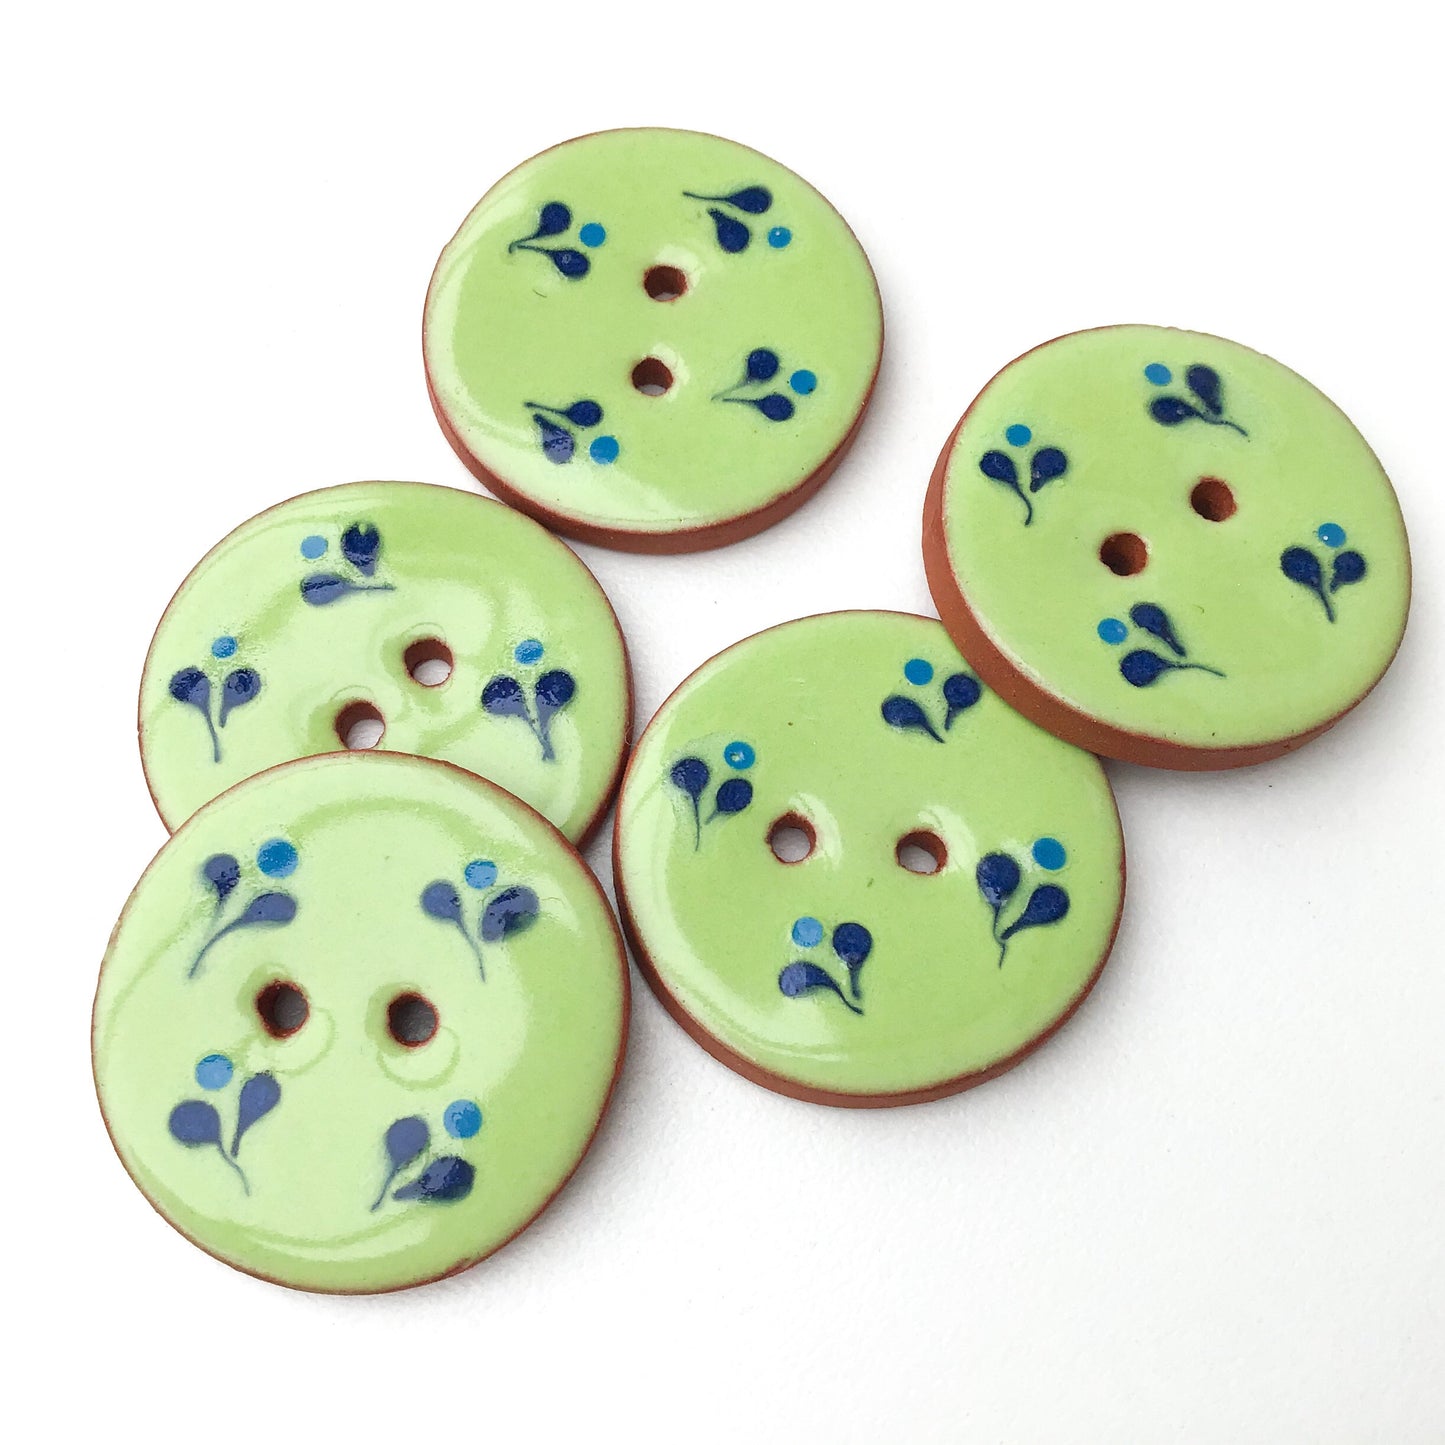 Decorative Ceramic Button with Small Floral Print - Green - Blue Clay Buttons - 1 1/16" (ws-65)